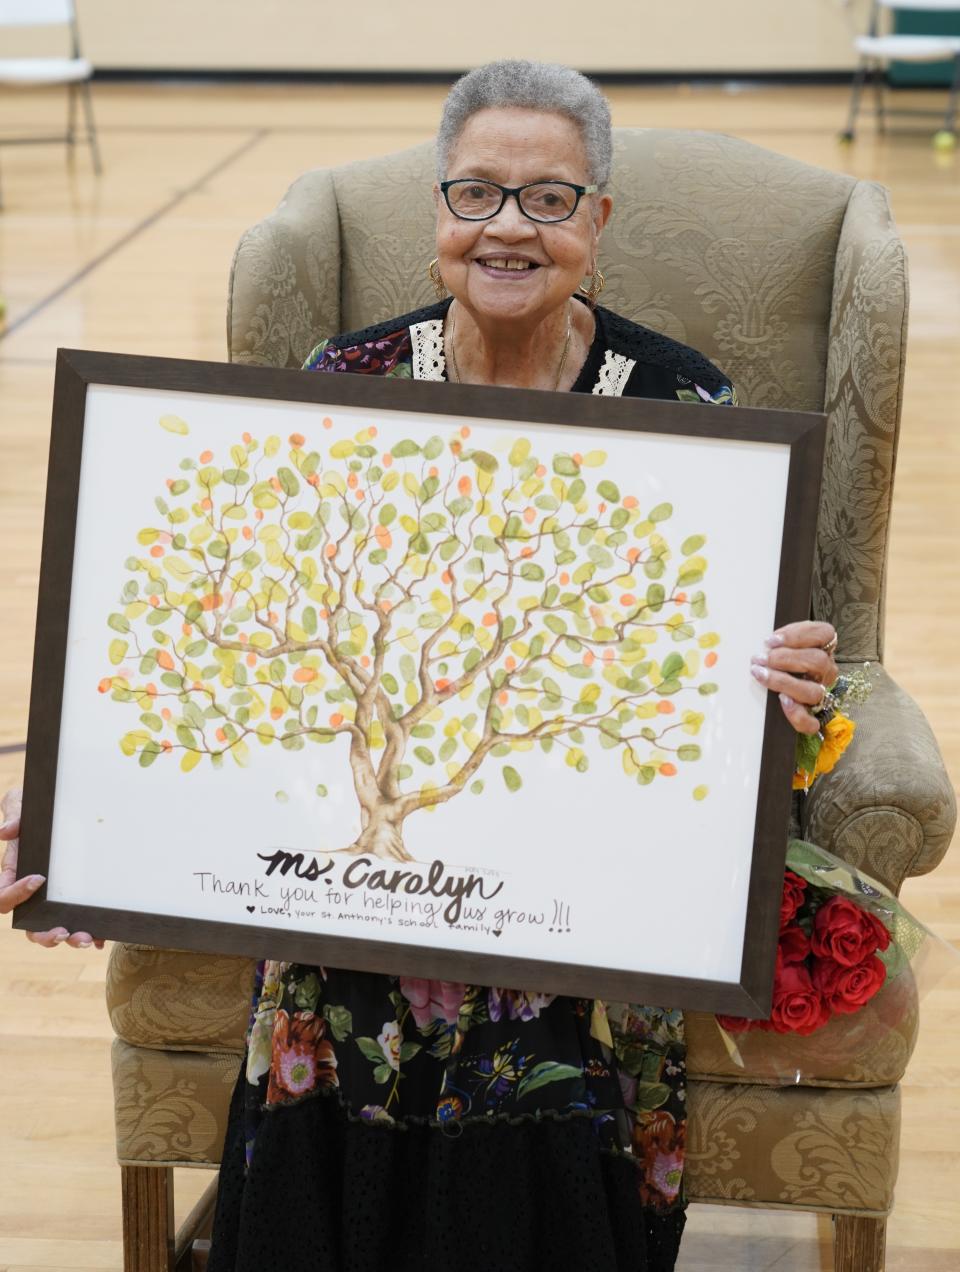 Carolyn Lenhardt was honored by colleagues, students and friends at St. Anthony of Padua Catholic School in Greenville SC. Beginning in in 1970, 'Ms. Carolyn' served for 53 years as a teacher and administrator at the small school in Greenville's West End.